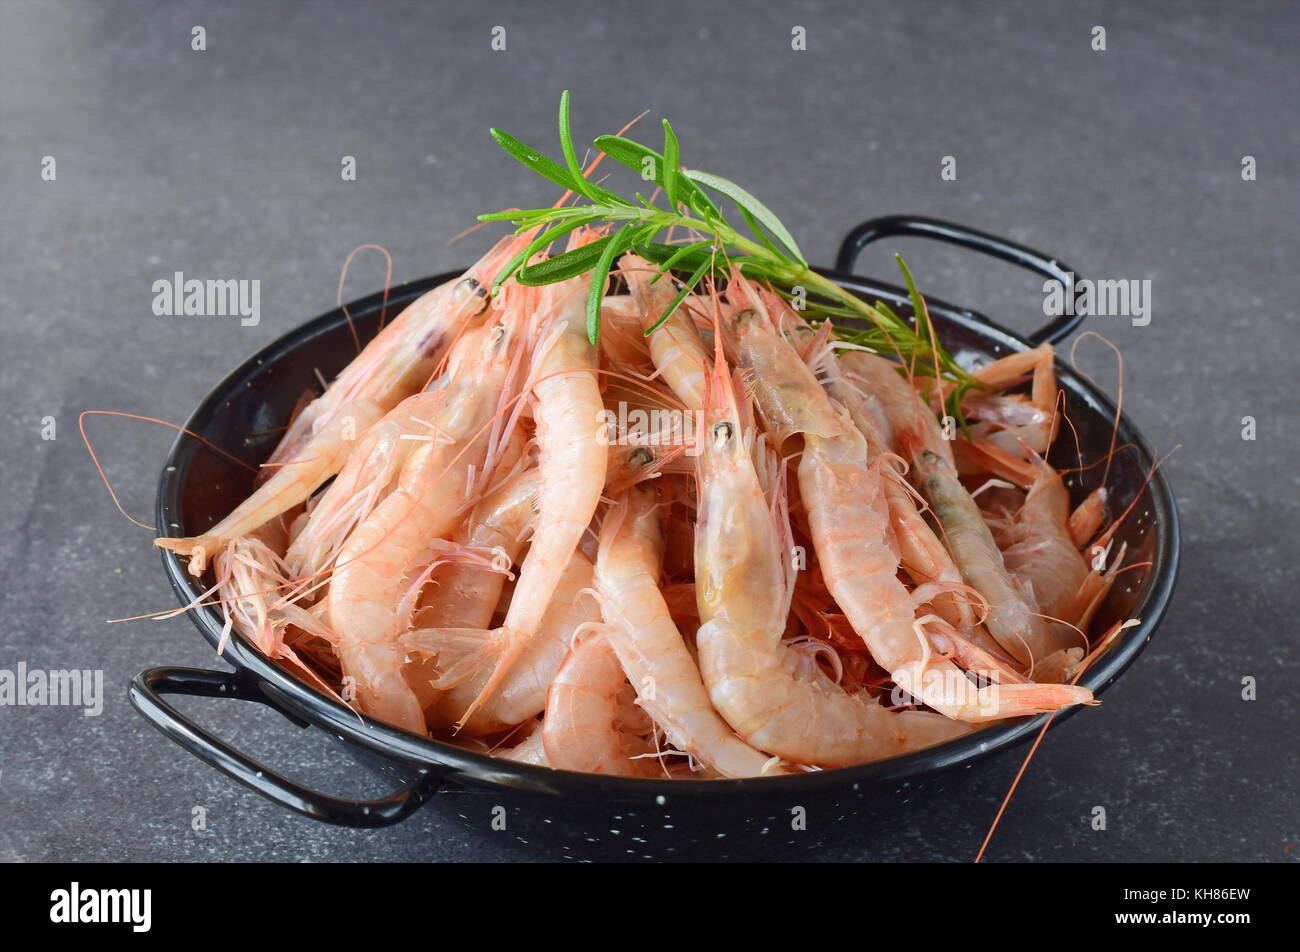 Raw fresh shrimps in a black metal bowl with rosemary on a grey background. Mediterranean lifestyle. Healthy food Stock Photo